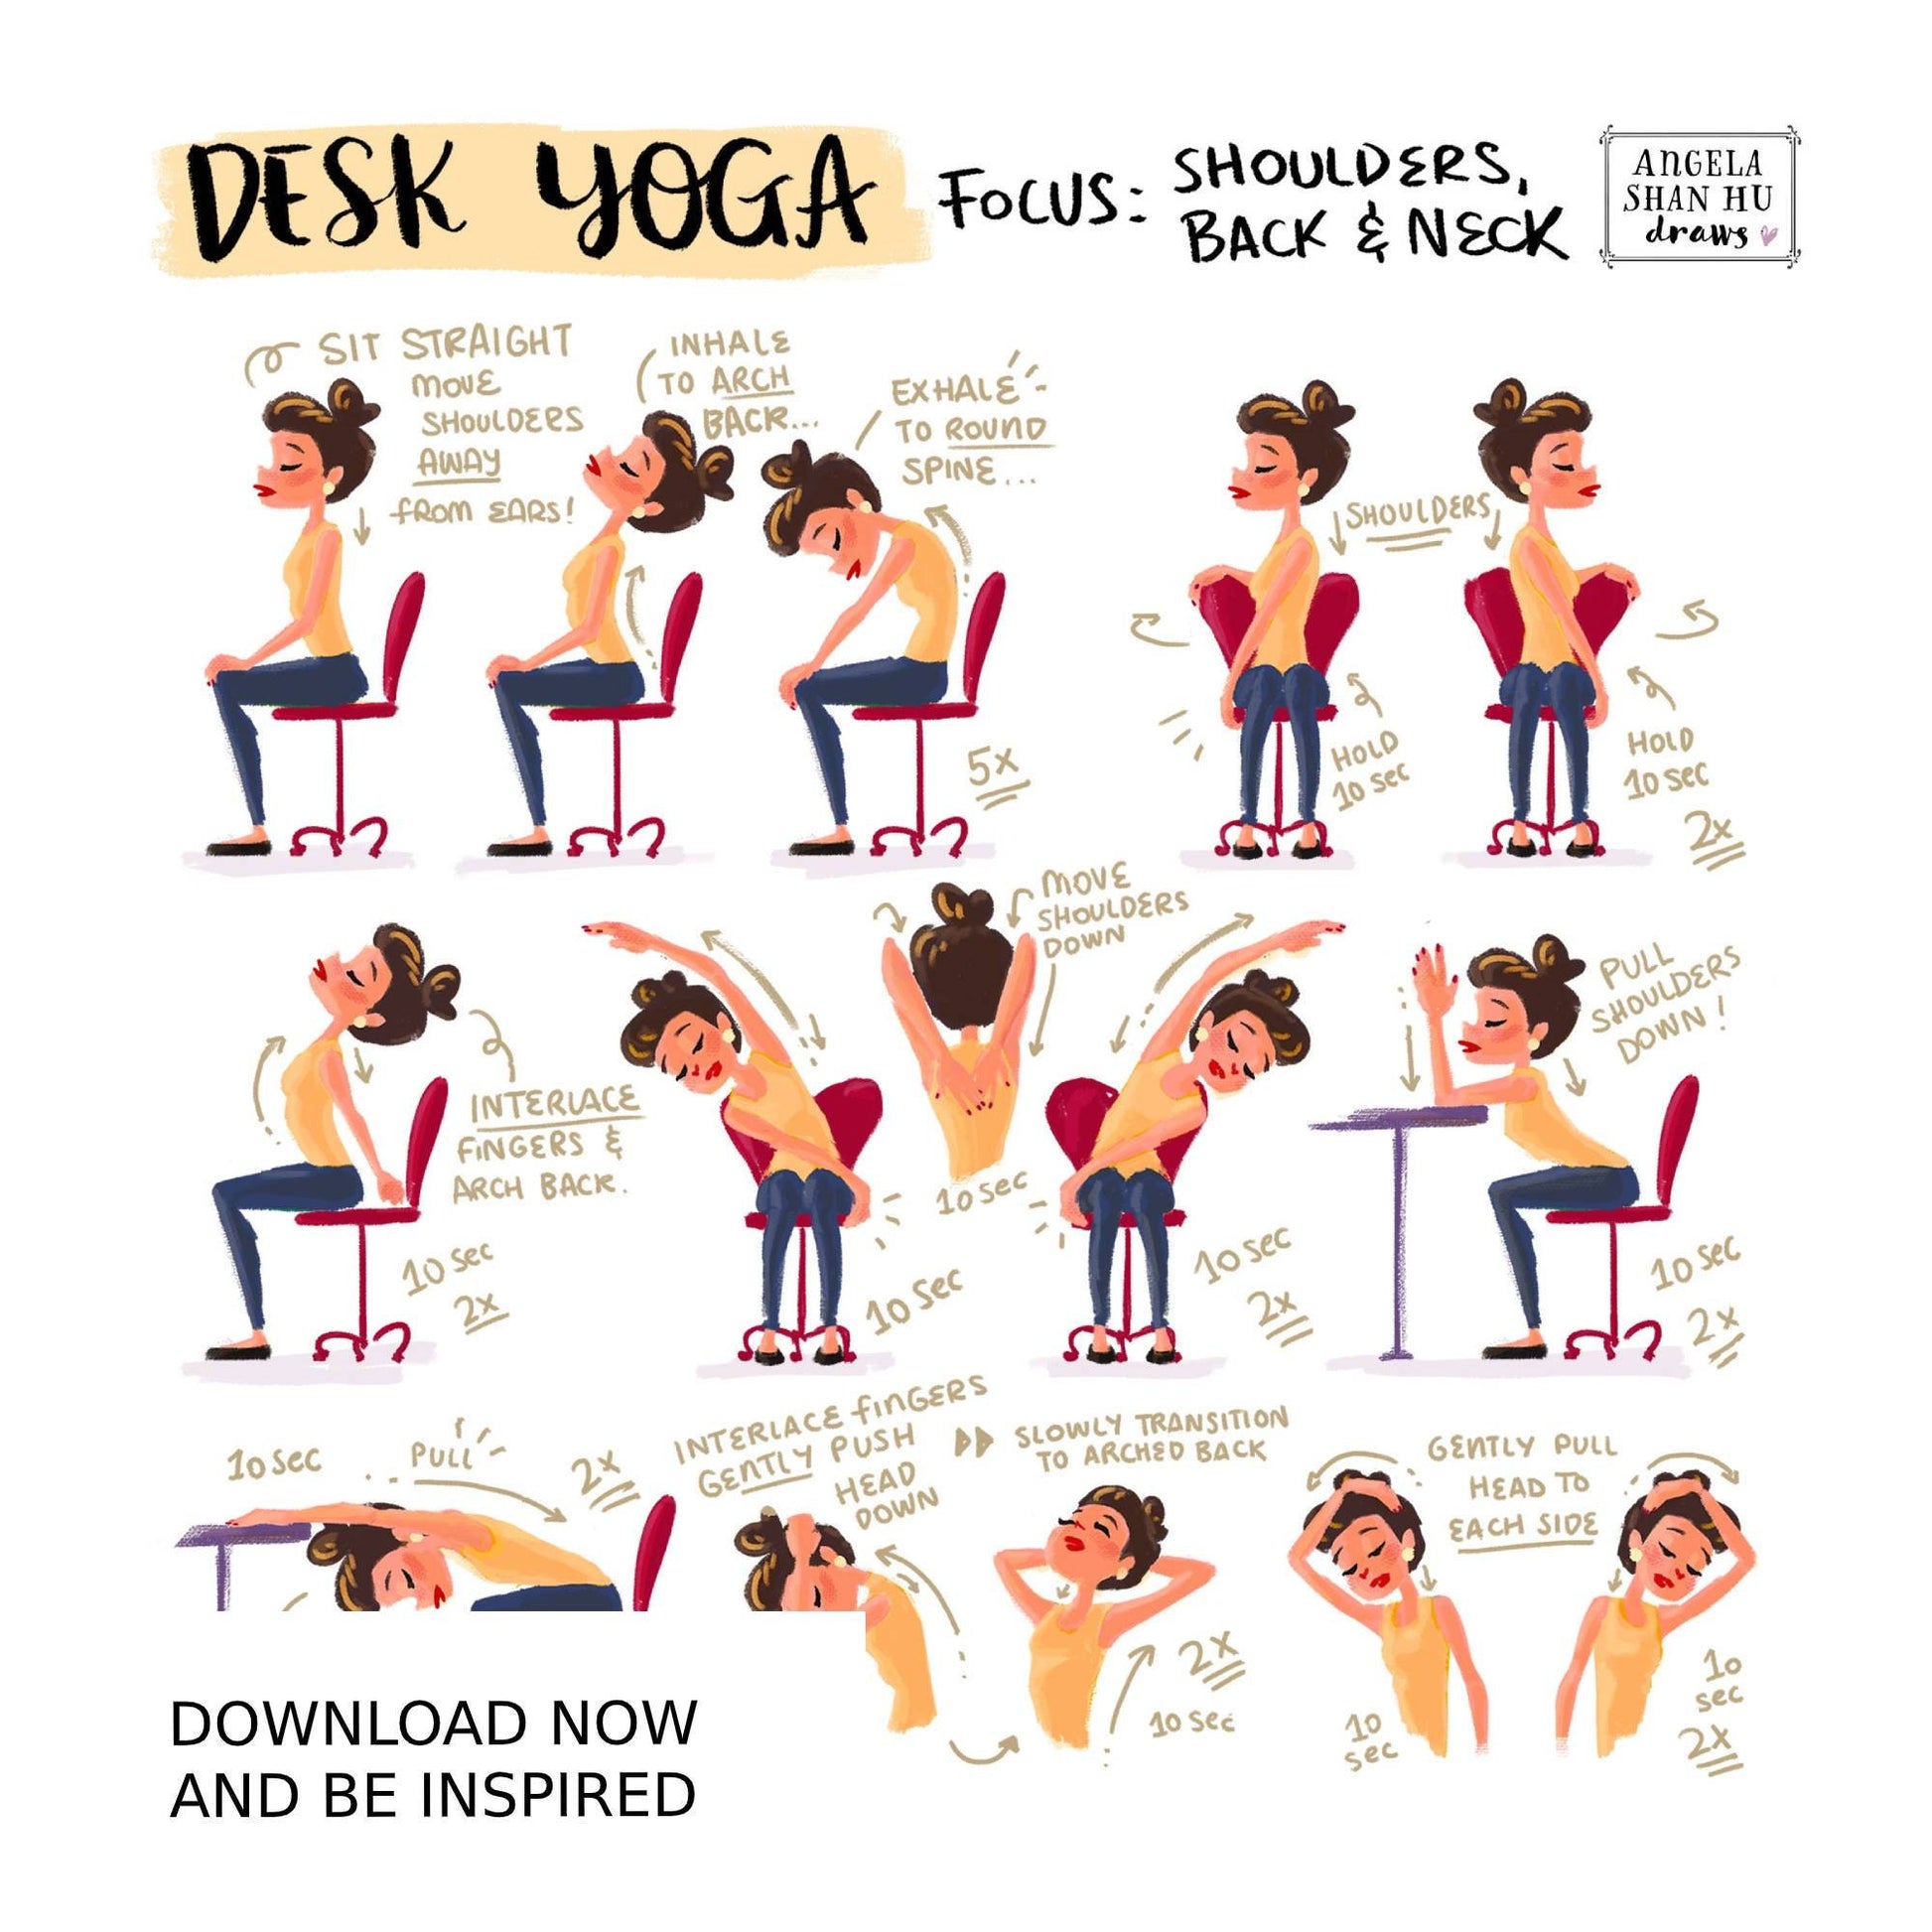 5 yoga poses you can do RIGHT NOW, in your chair! - Times of India